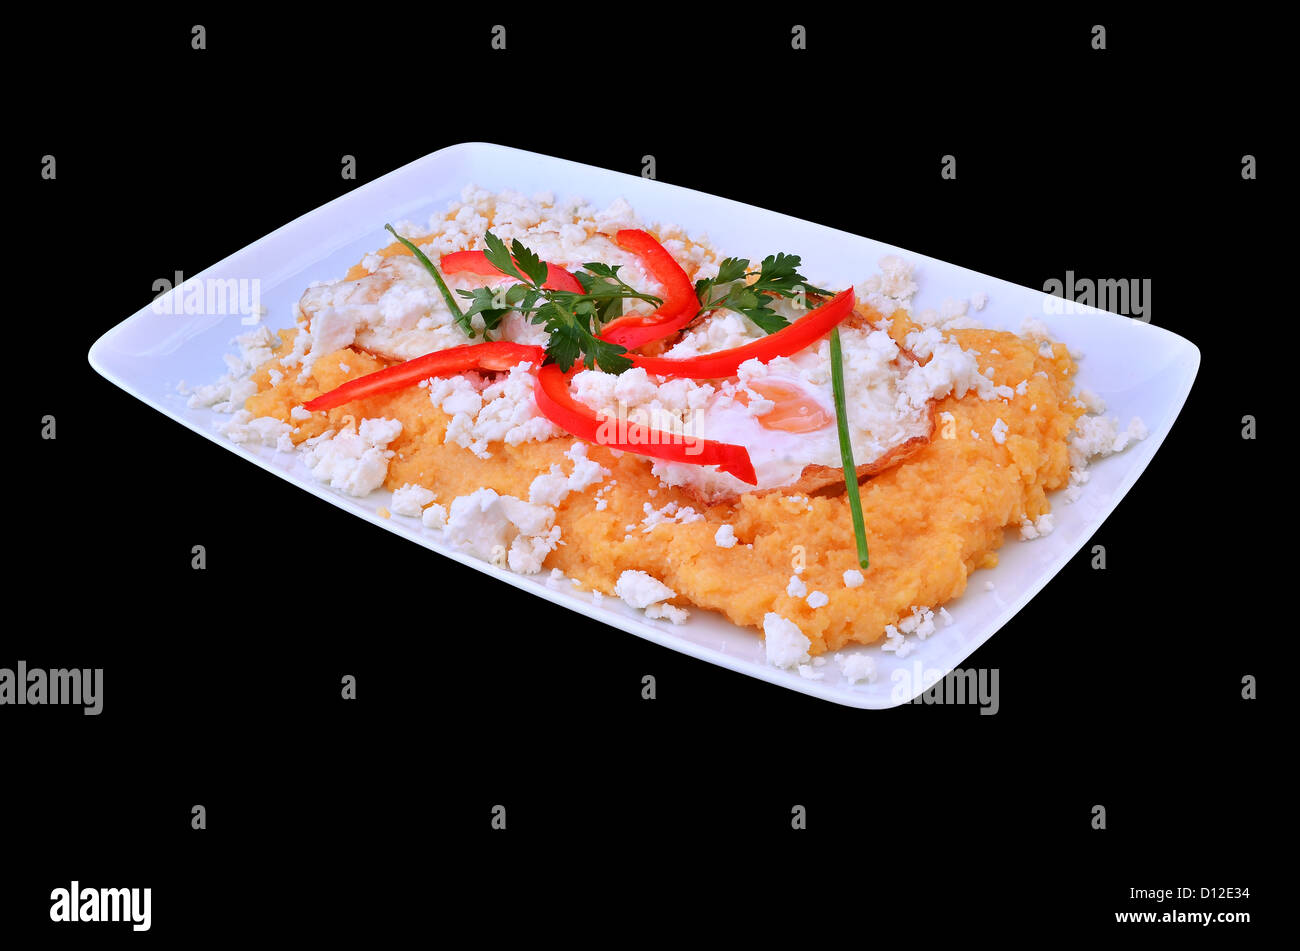 Polenta with cheese and fried eggs, romanian cuisine. Isolated with clipping mask. Stock Photo